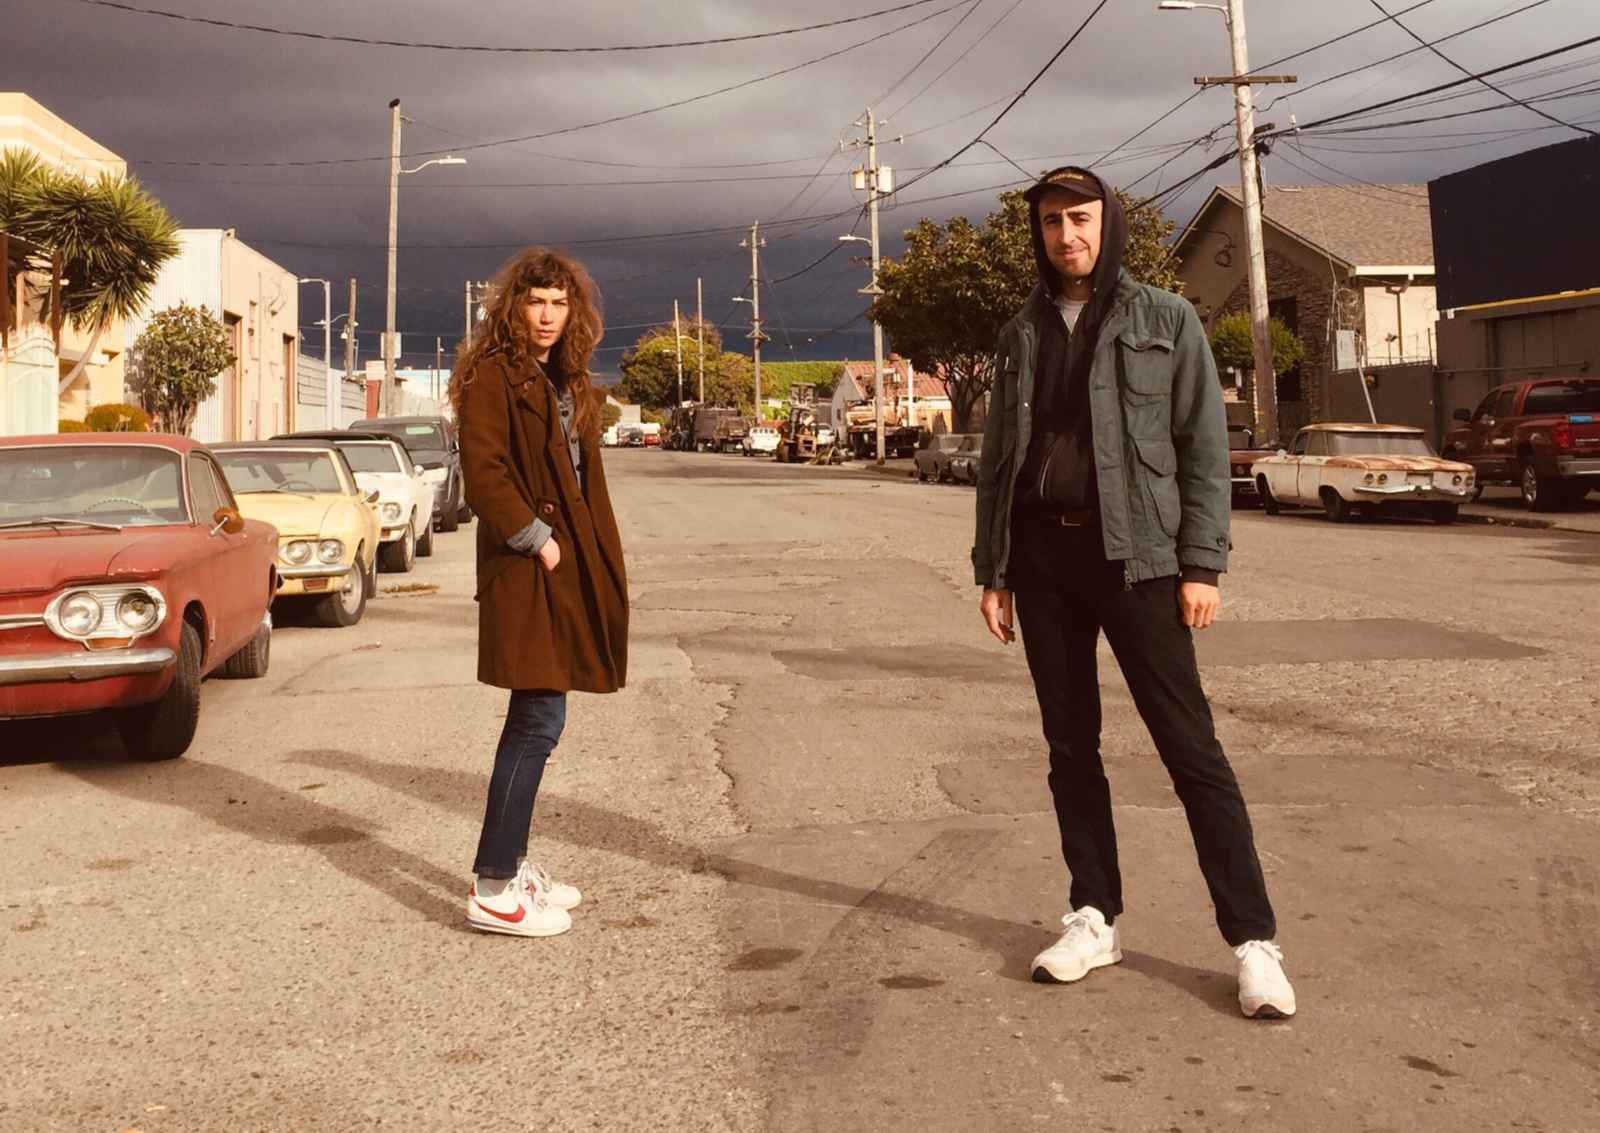 Track by Track: S/T by Flowertown  San Francisco duo Flowertown talk us through their new LP, S/T...